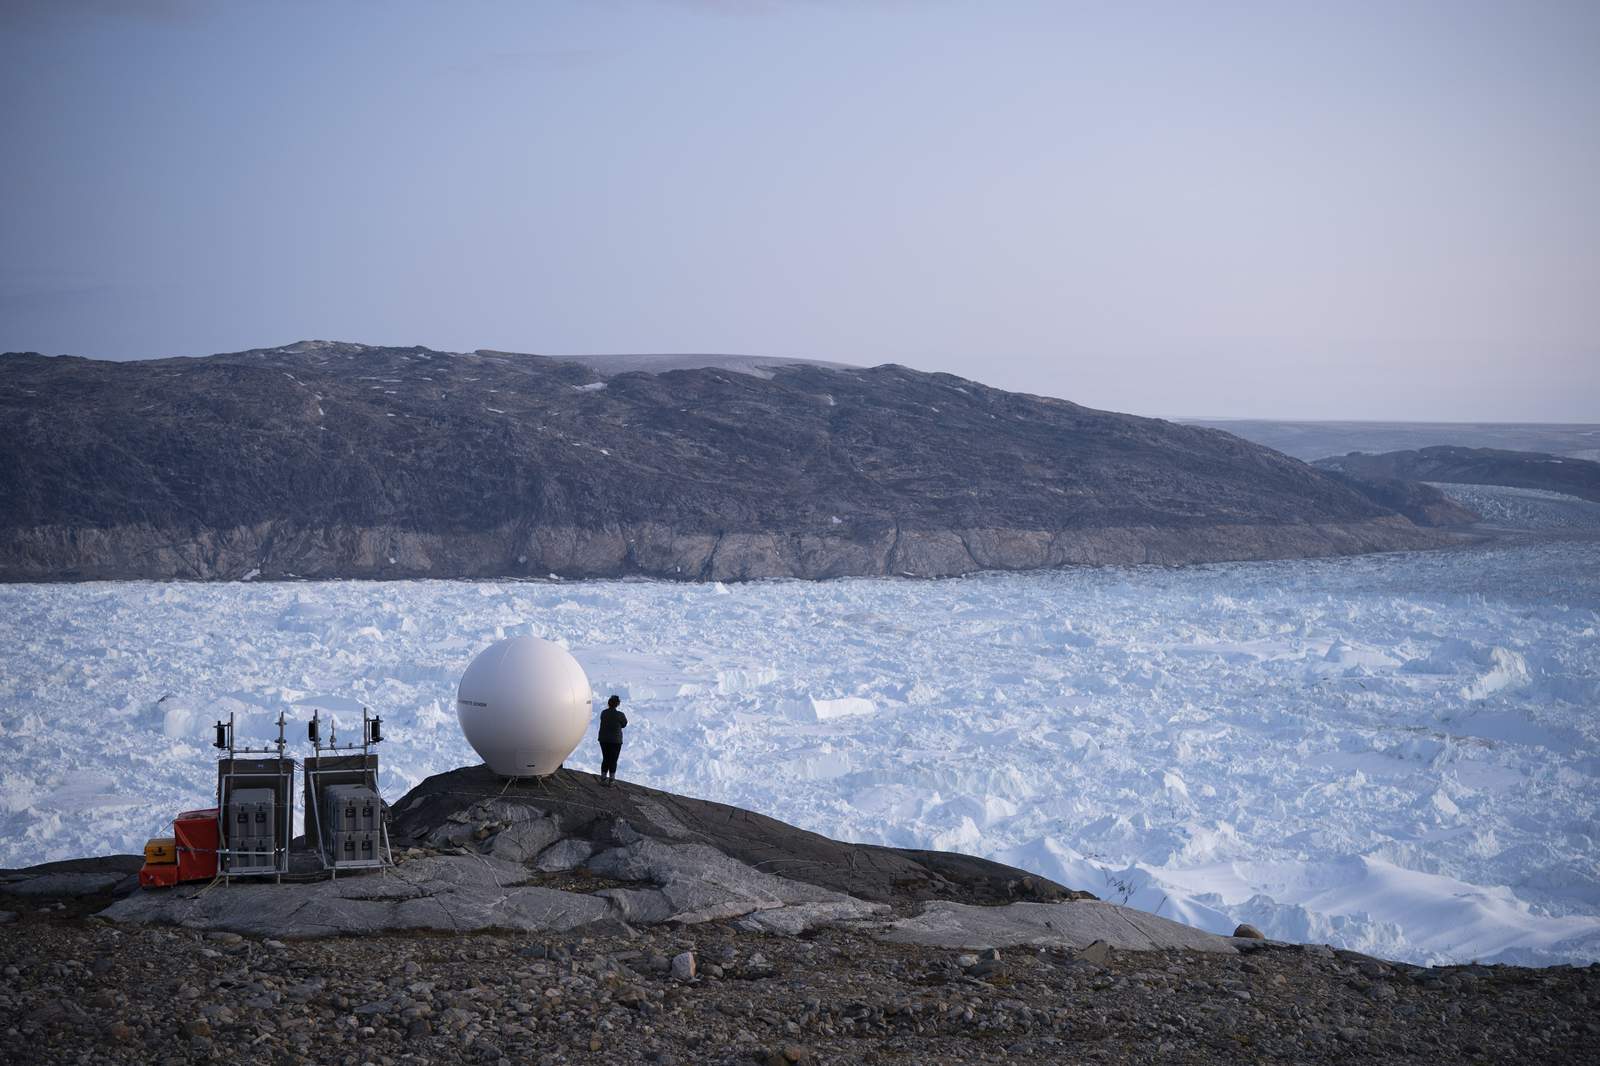 Record melt: Greenland lost 586 billion tons of ice in 2019